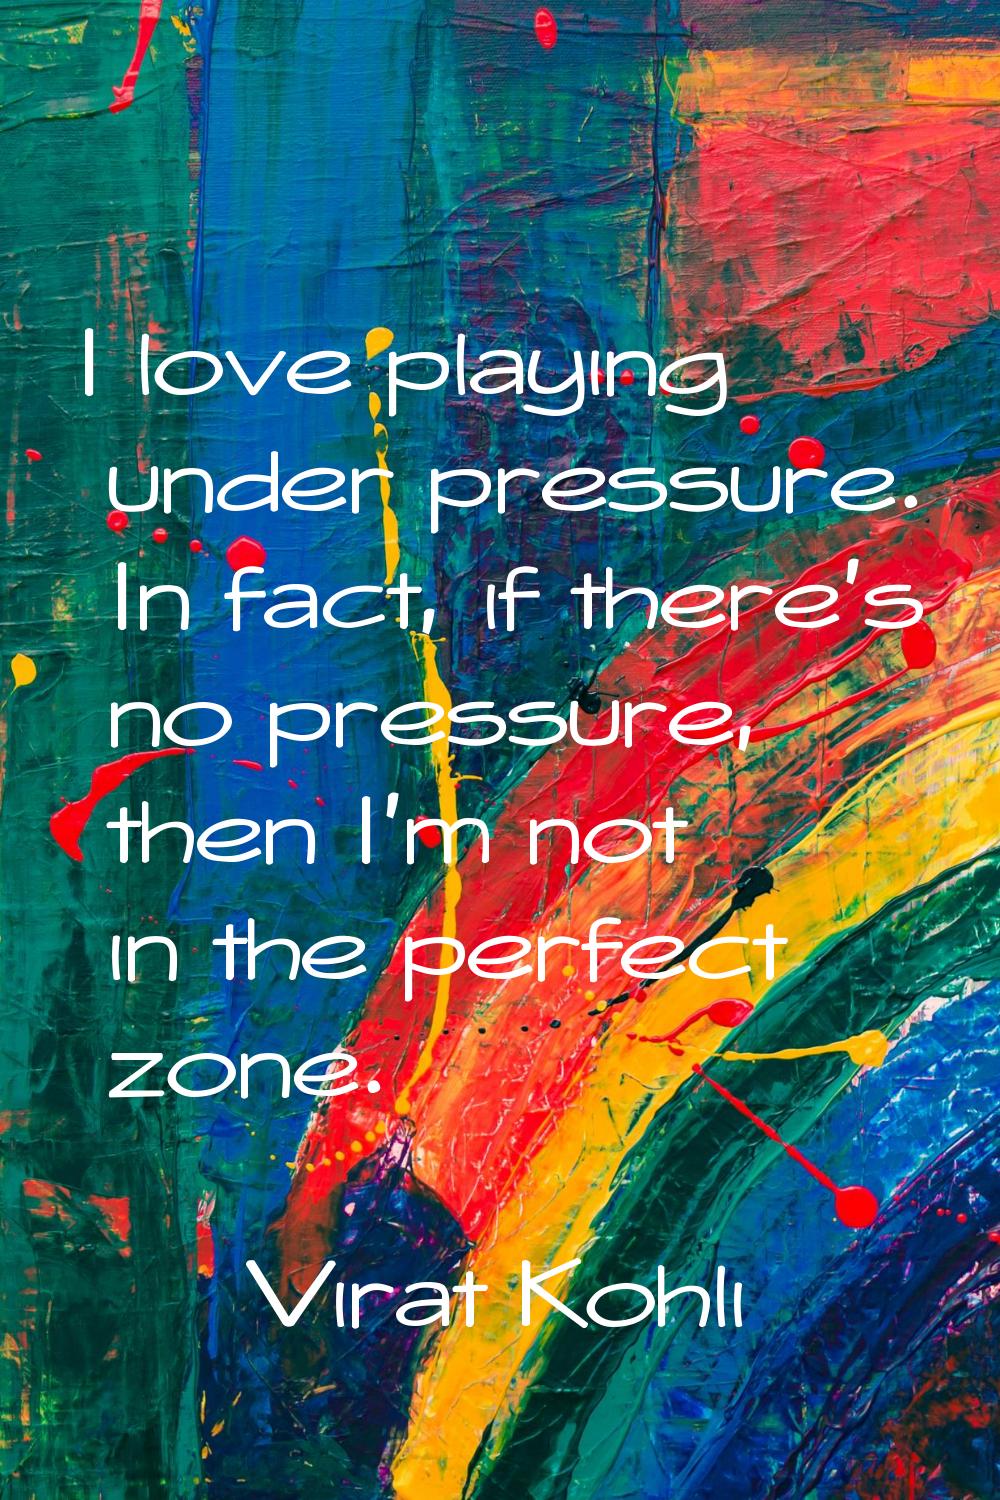 I love playing under pressure. In fact, if there's no pressure, then I'm not in the perfect zone.